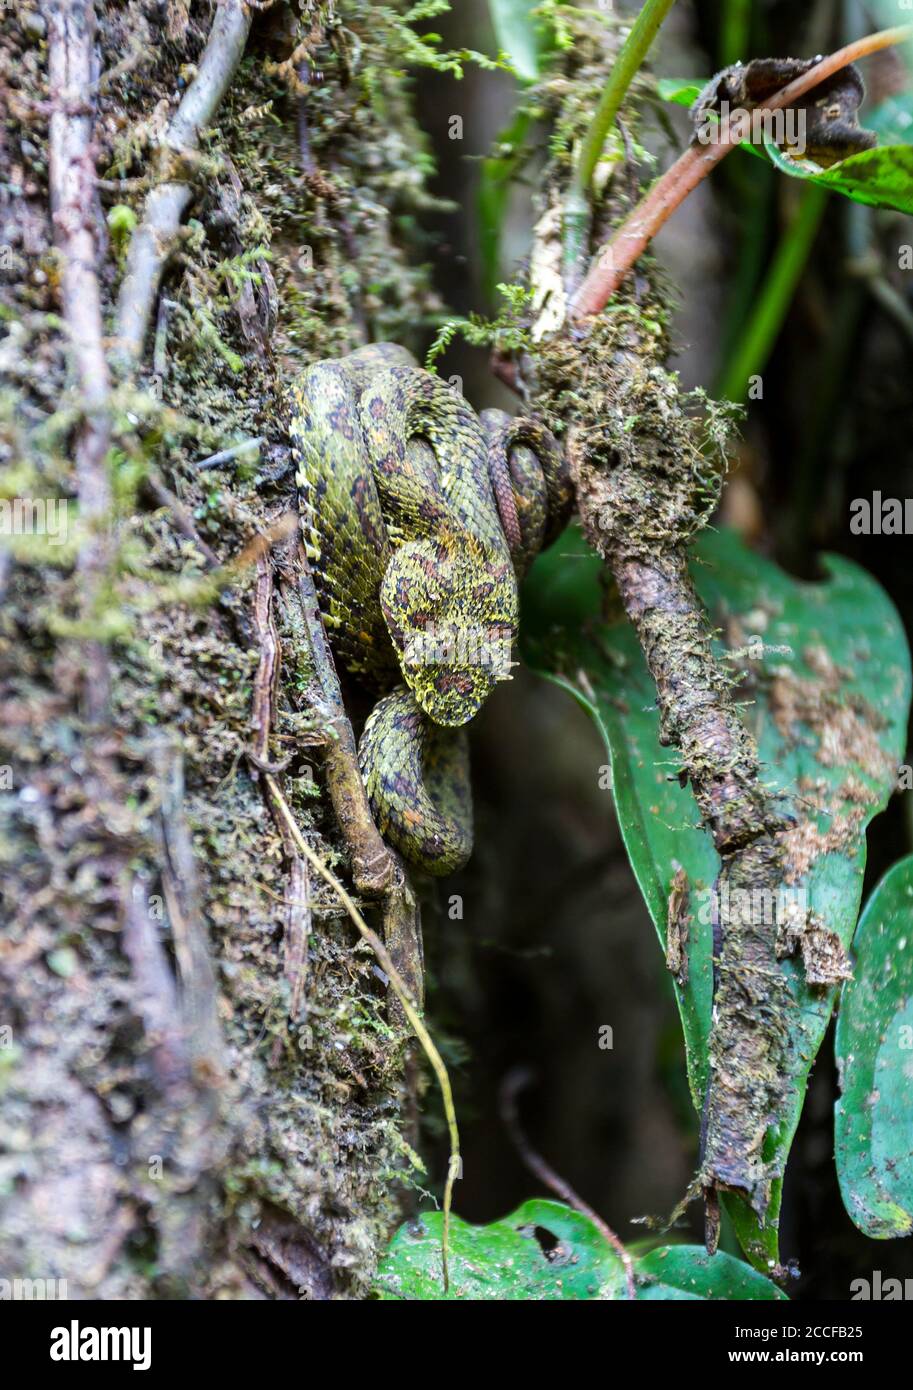 Eyelash viper, Bothriechis schlegelli, highly venomous pit viper, family Viperidae, native to Central and South America Stock Photo